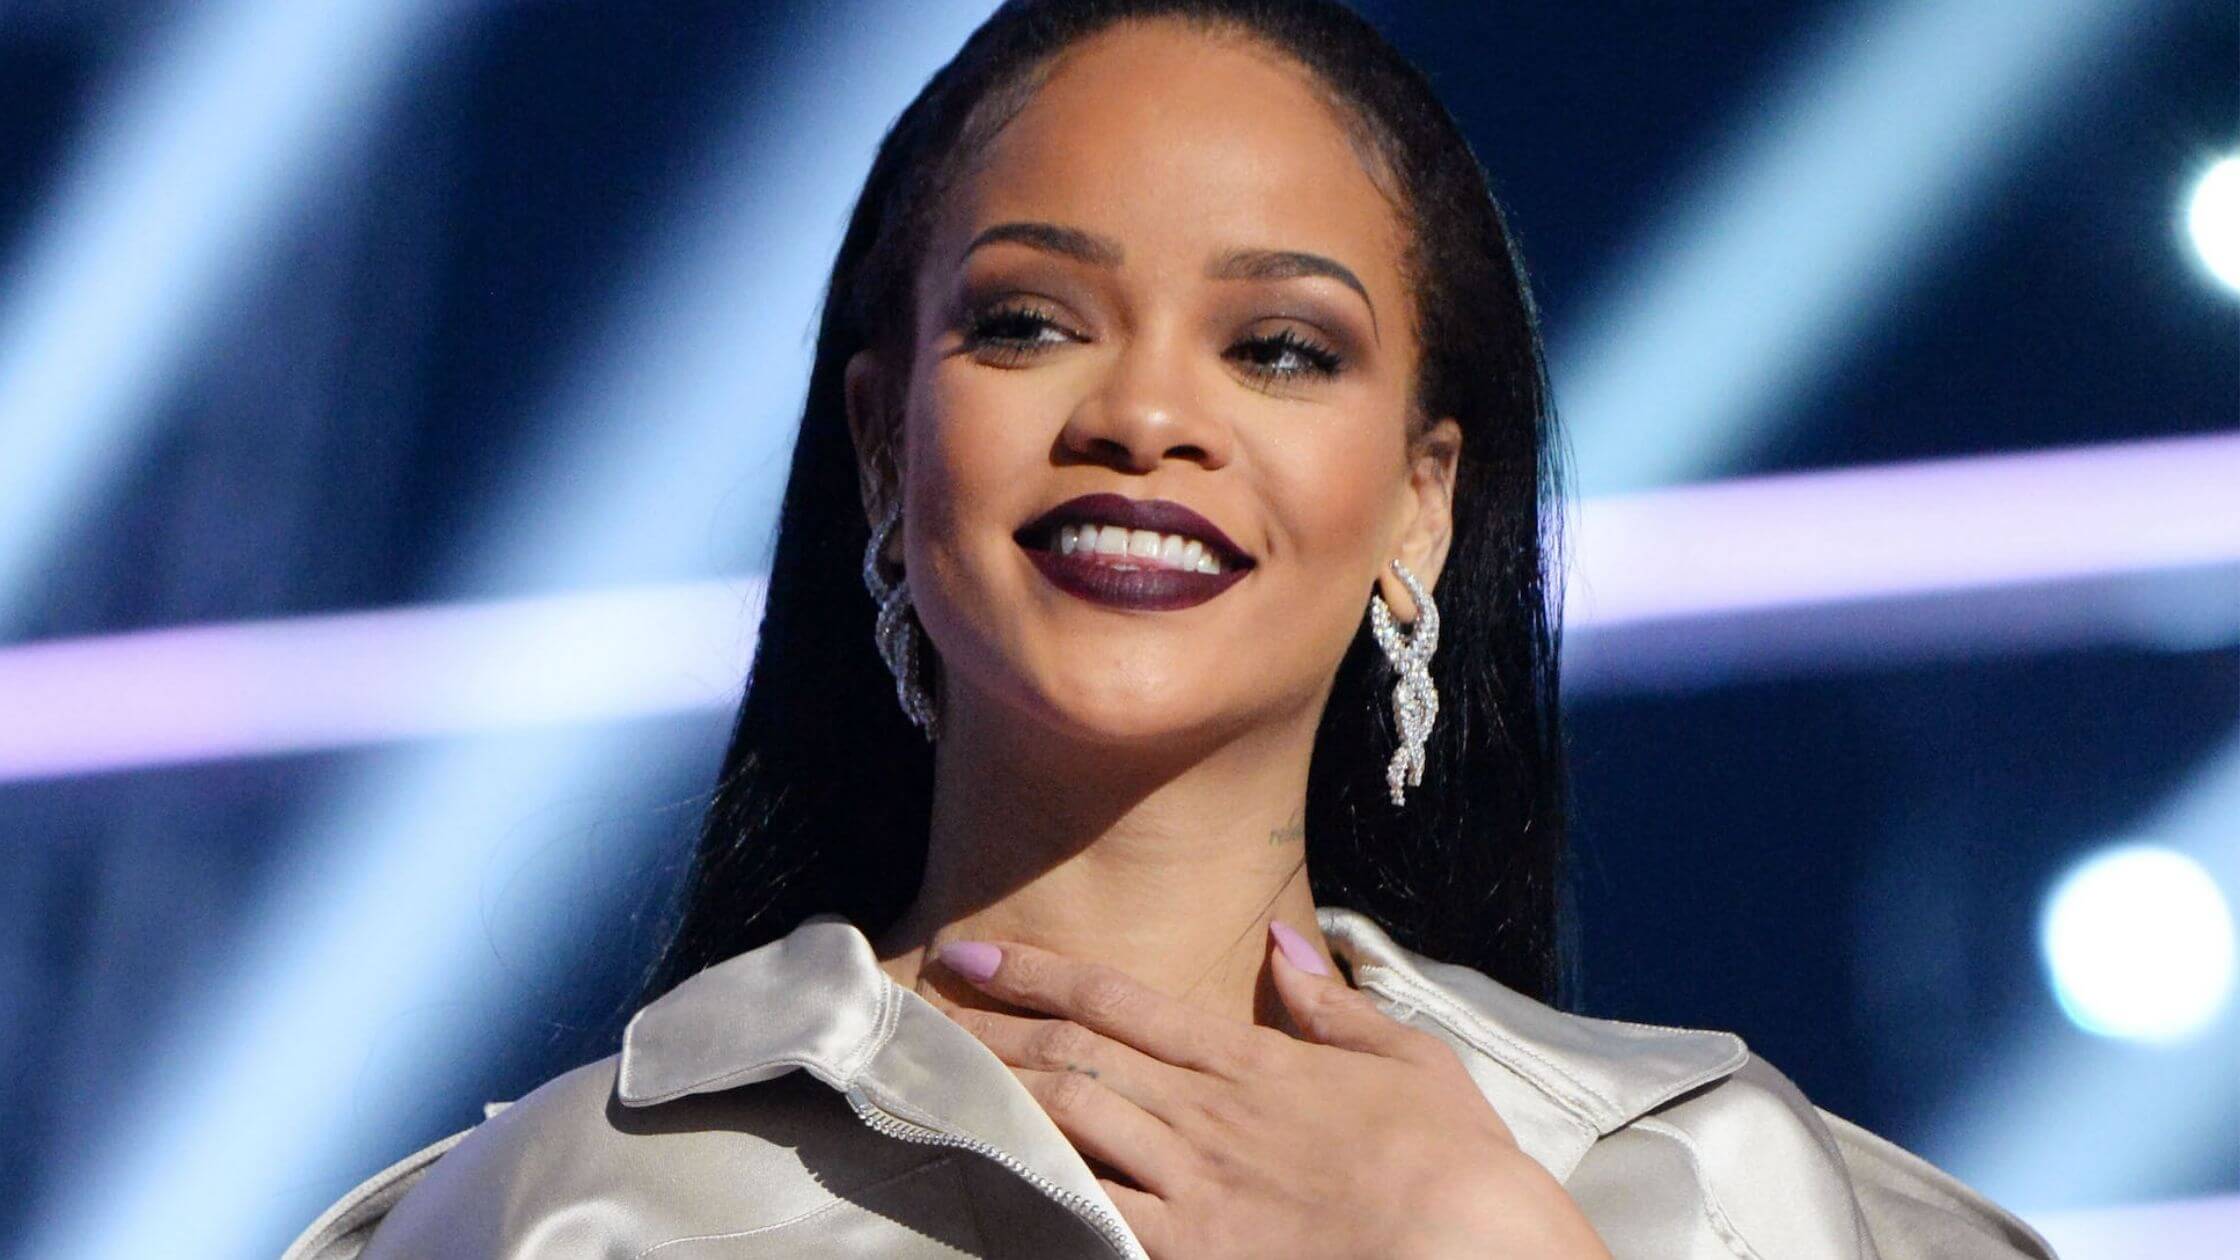 Rihanna Is Now America’s Youngest Self-Made Billionaire Woman In the U.S